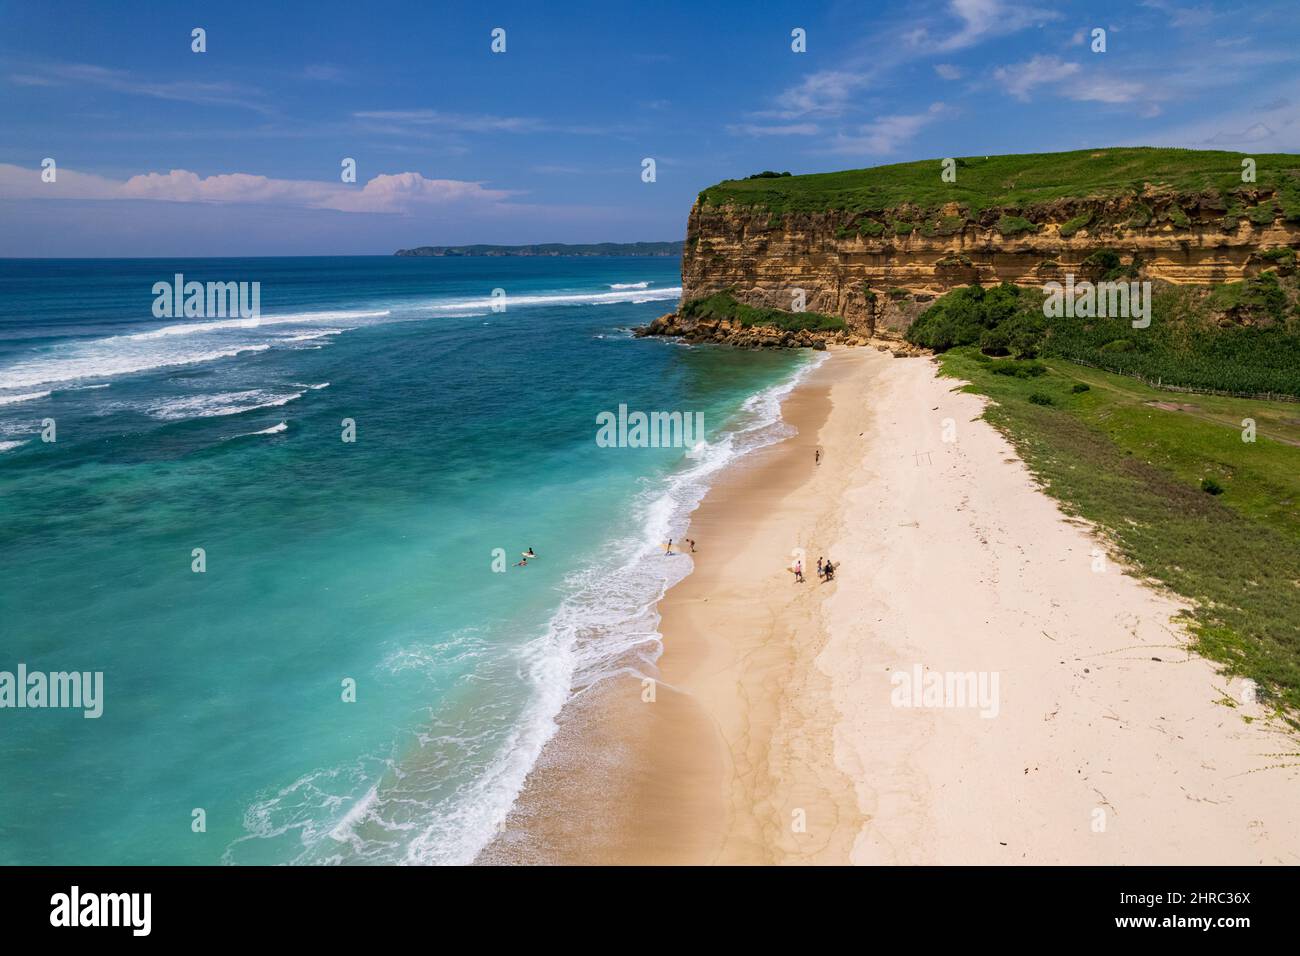 Aerial view of surfers on Sungkun Beach, Lombok, West Nusa Tenggara, Indonesia Stock Photo